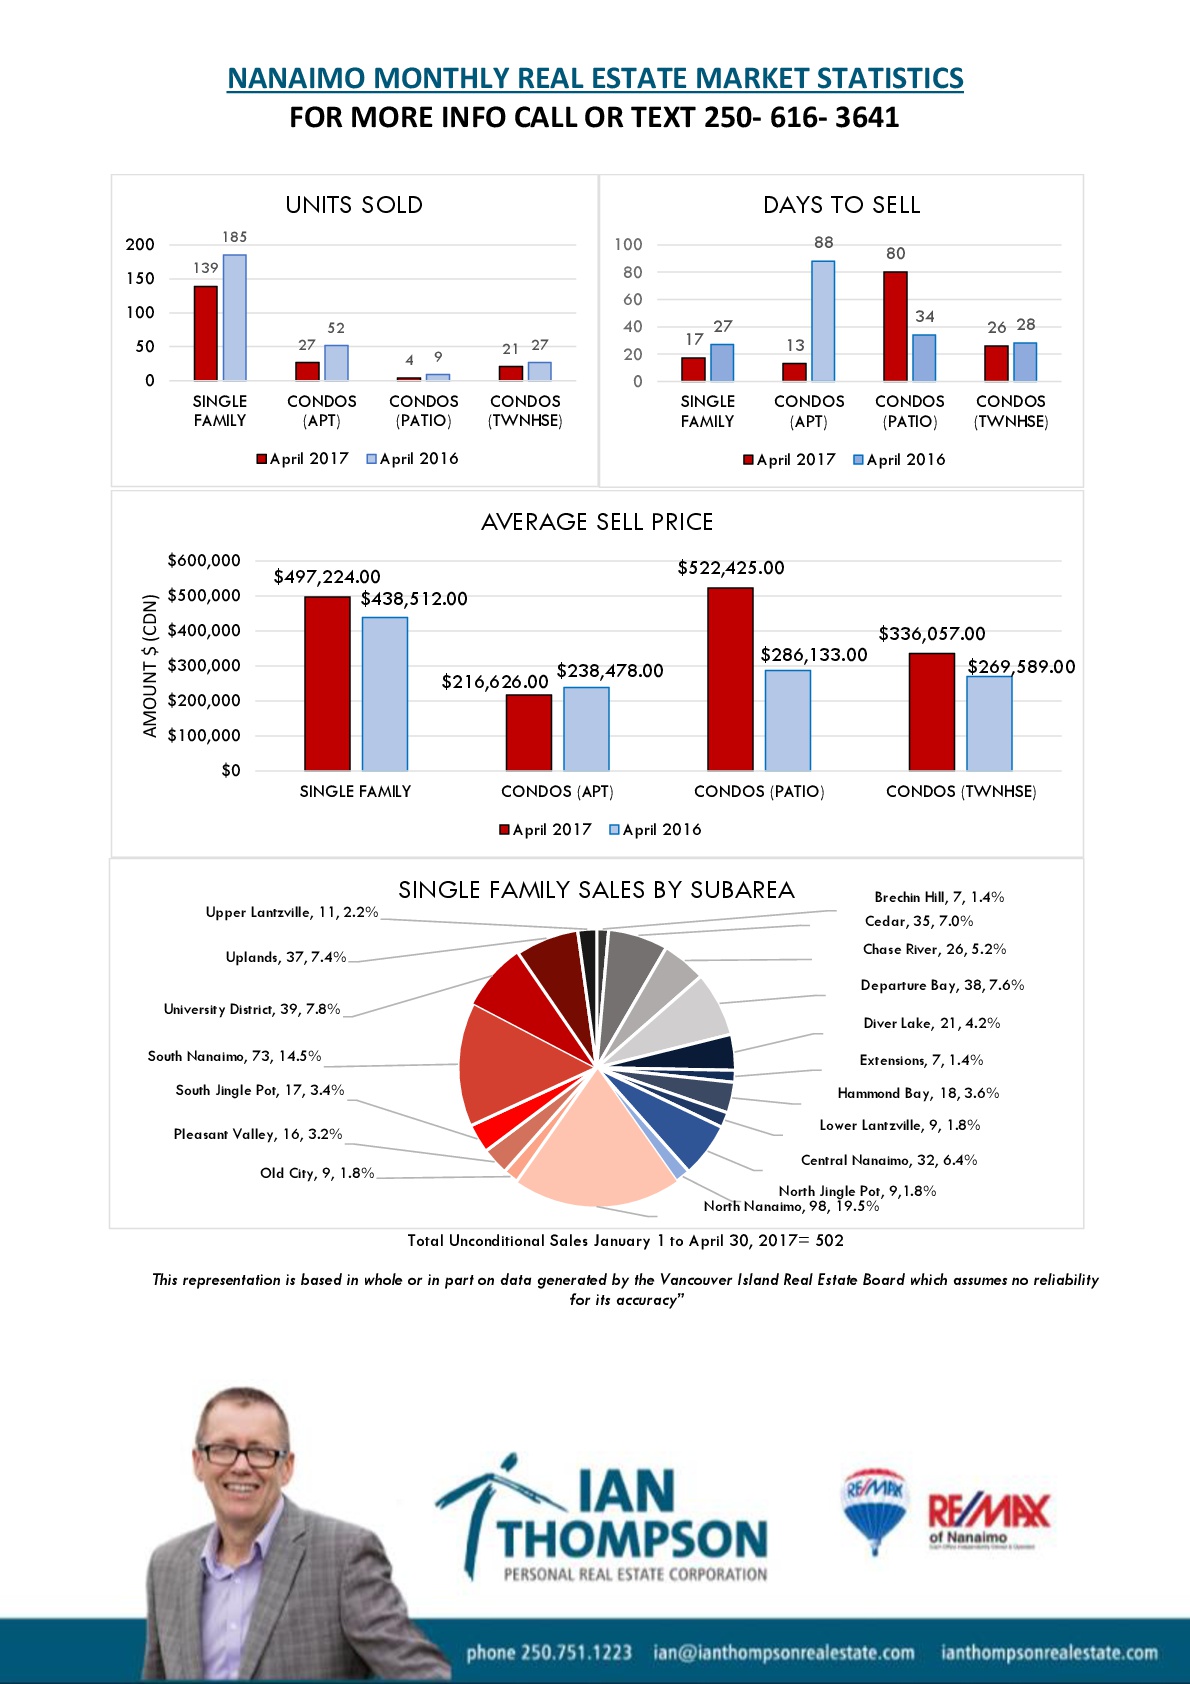 March 2017 Monthly Market Stats, Ian Thompson, Nanaimo Real Estate, Market Update